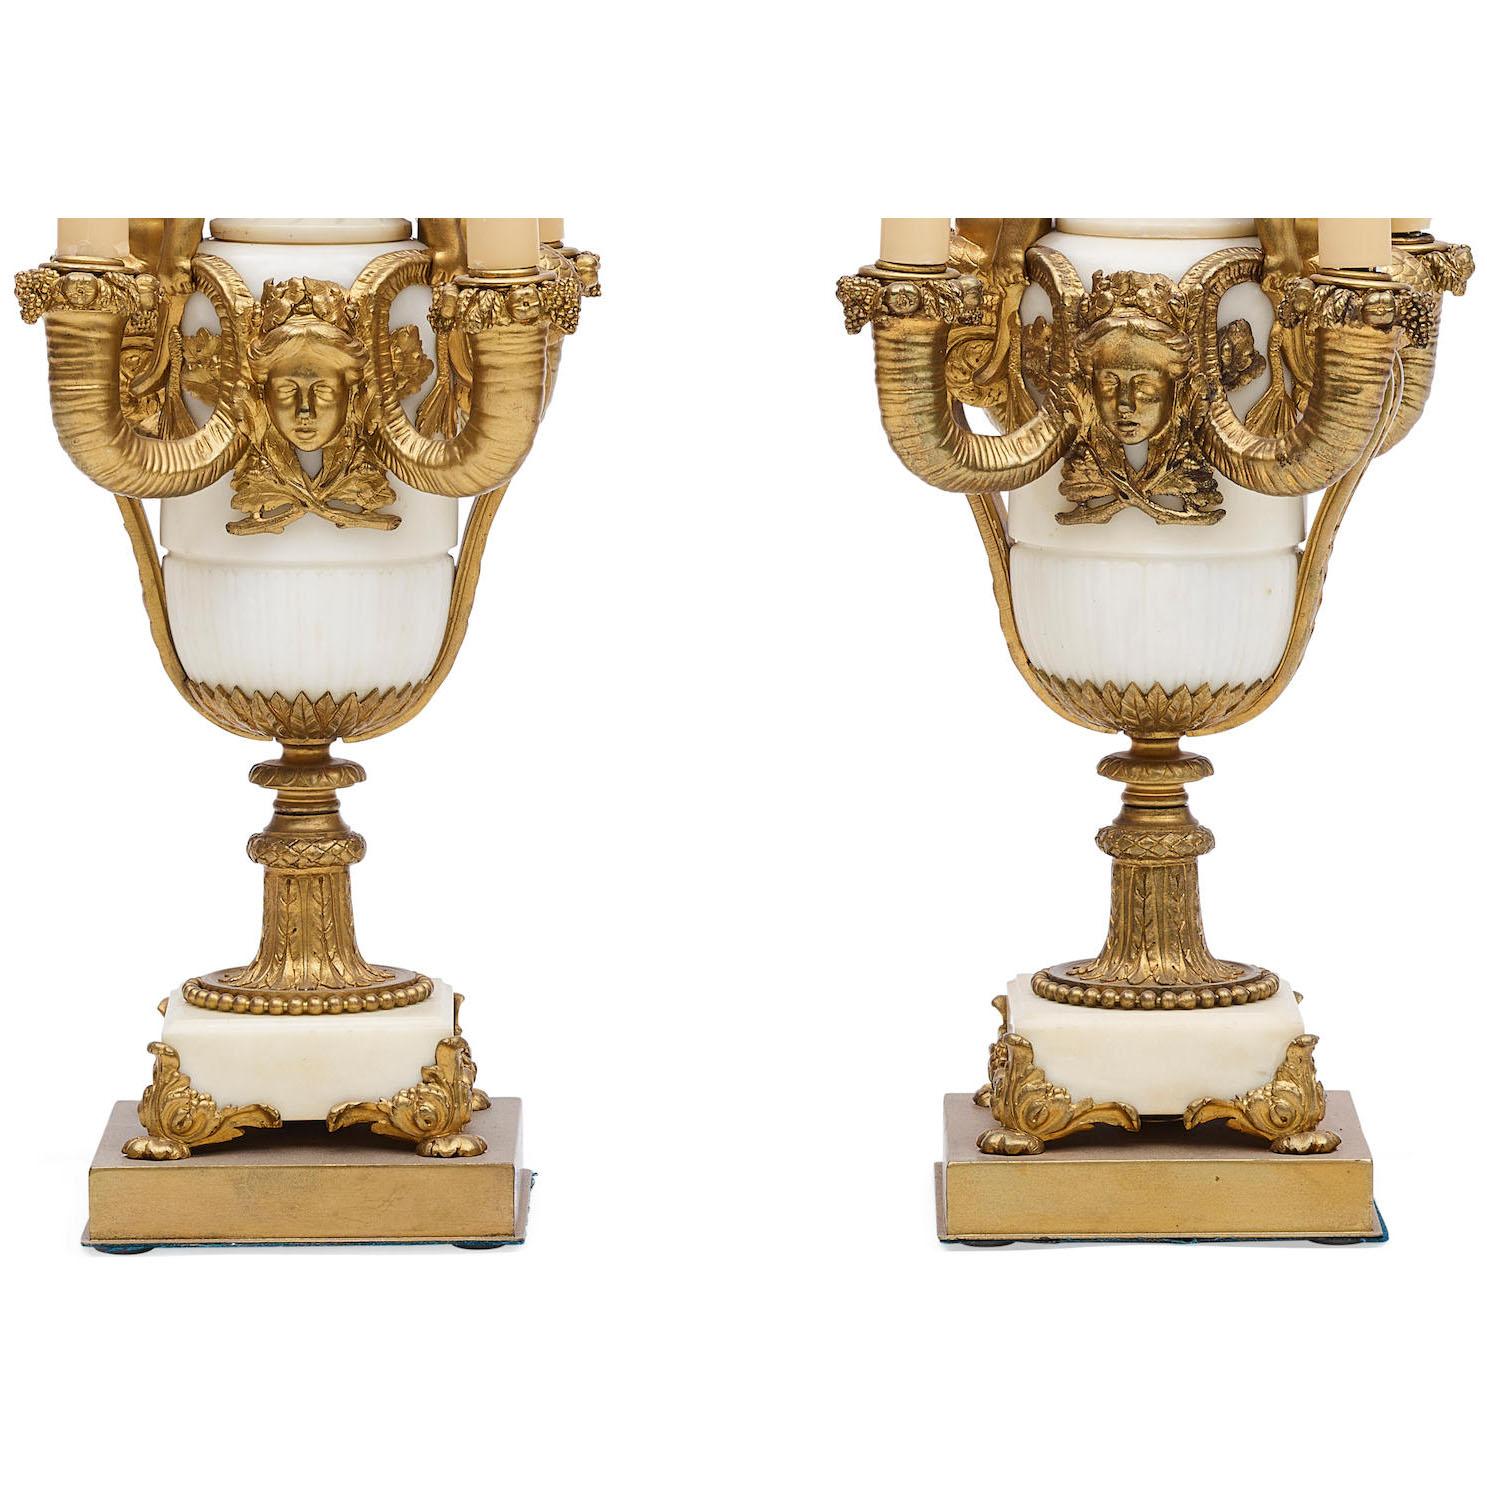 Pr. French 19th Century Louis XV Style Marble & Ormolu Mermaid Putti Table Lamps For Sale 3